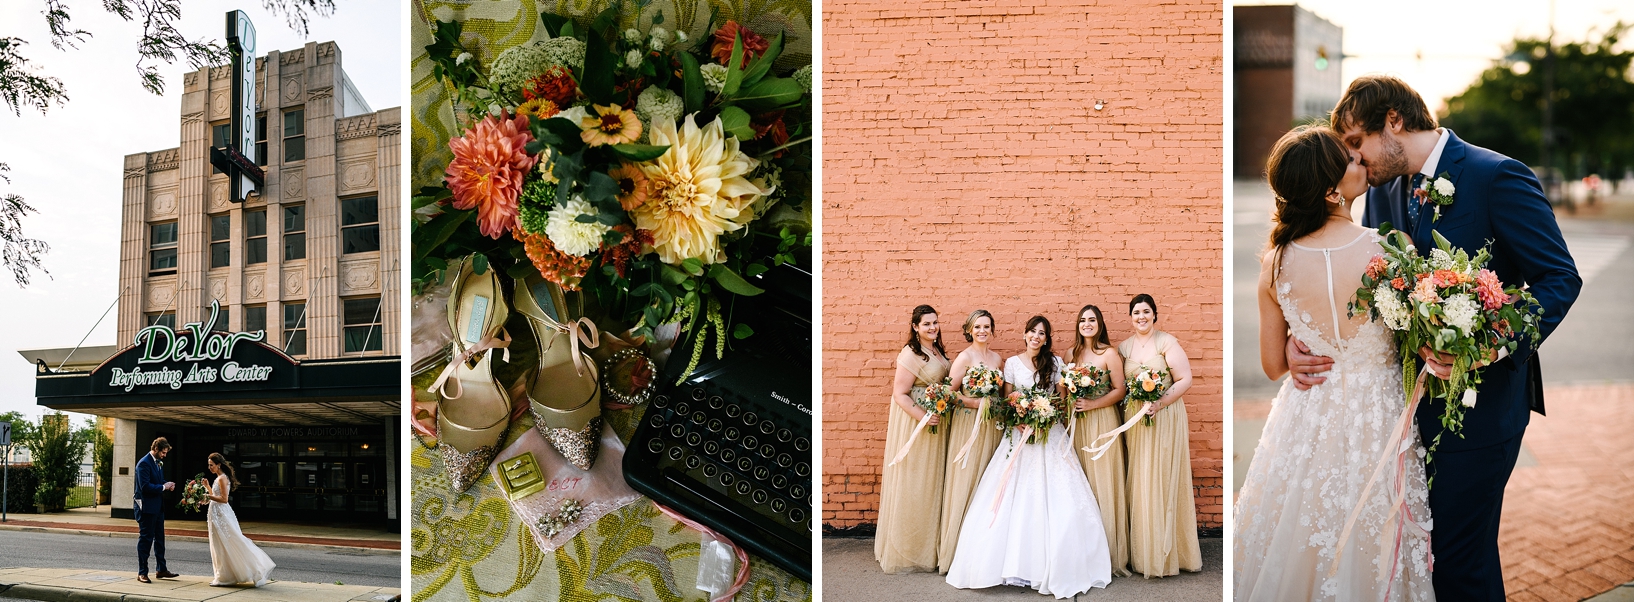 Vintage Wedding at Powers Auditorium in Youngstown OH